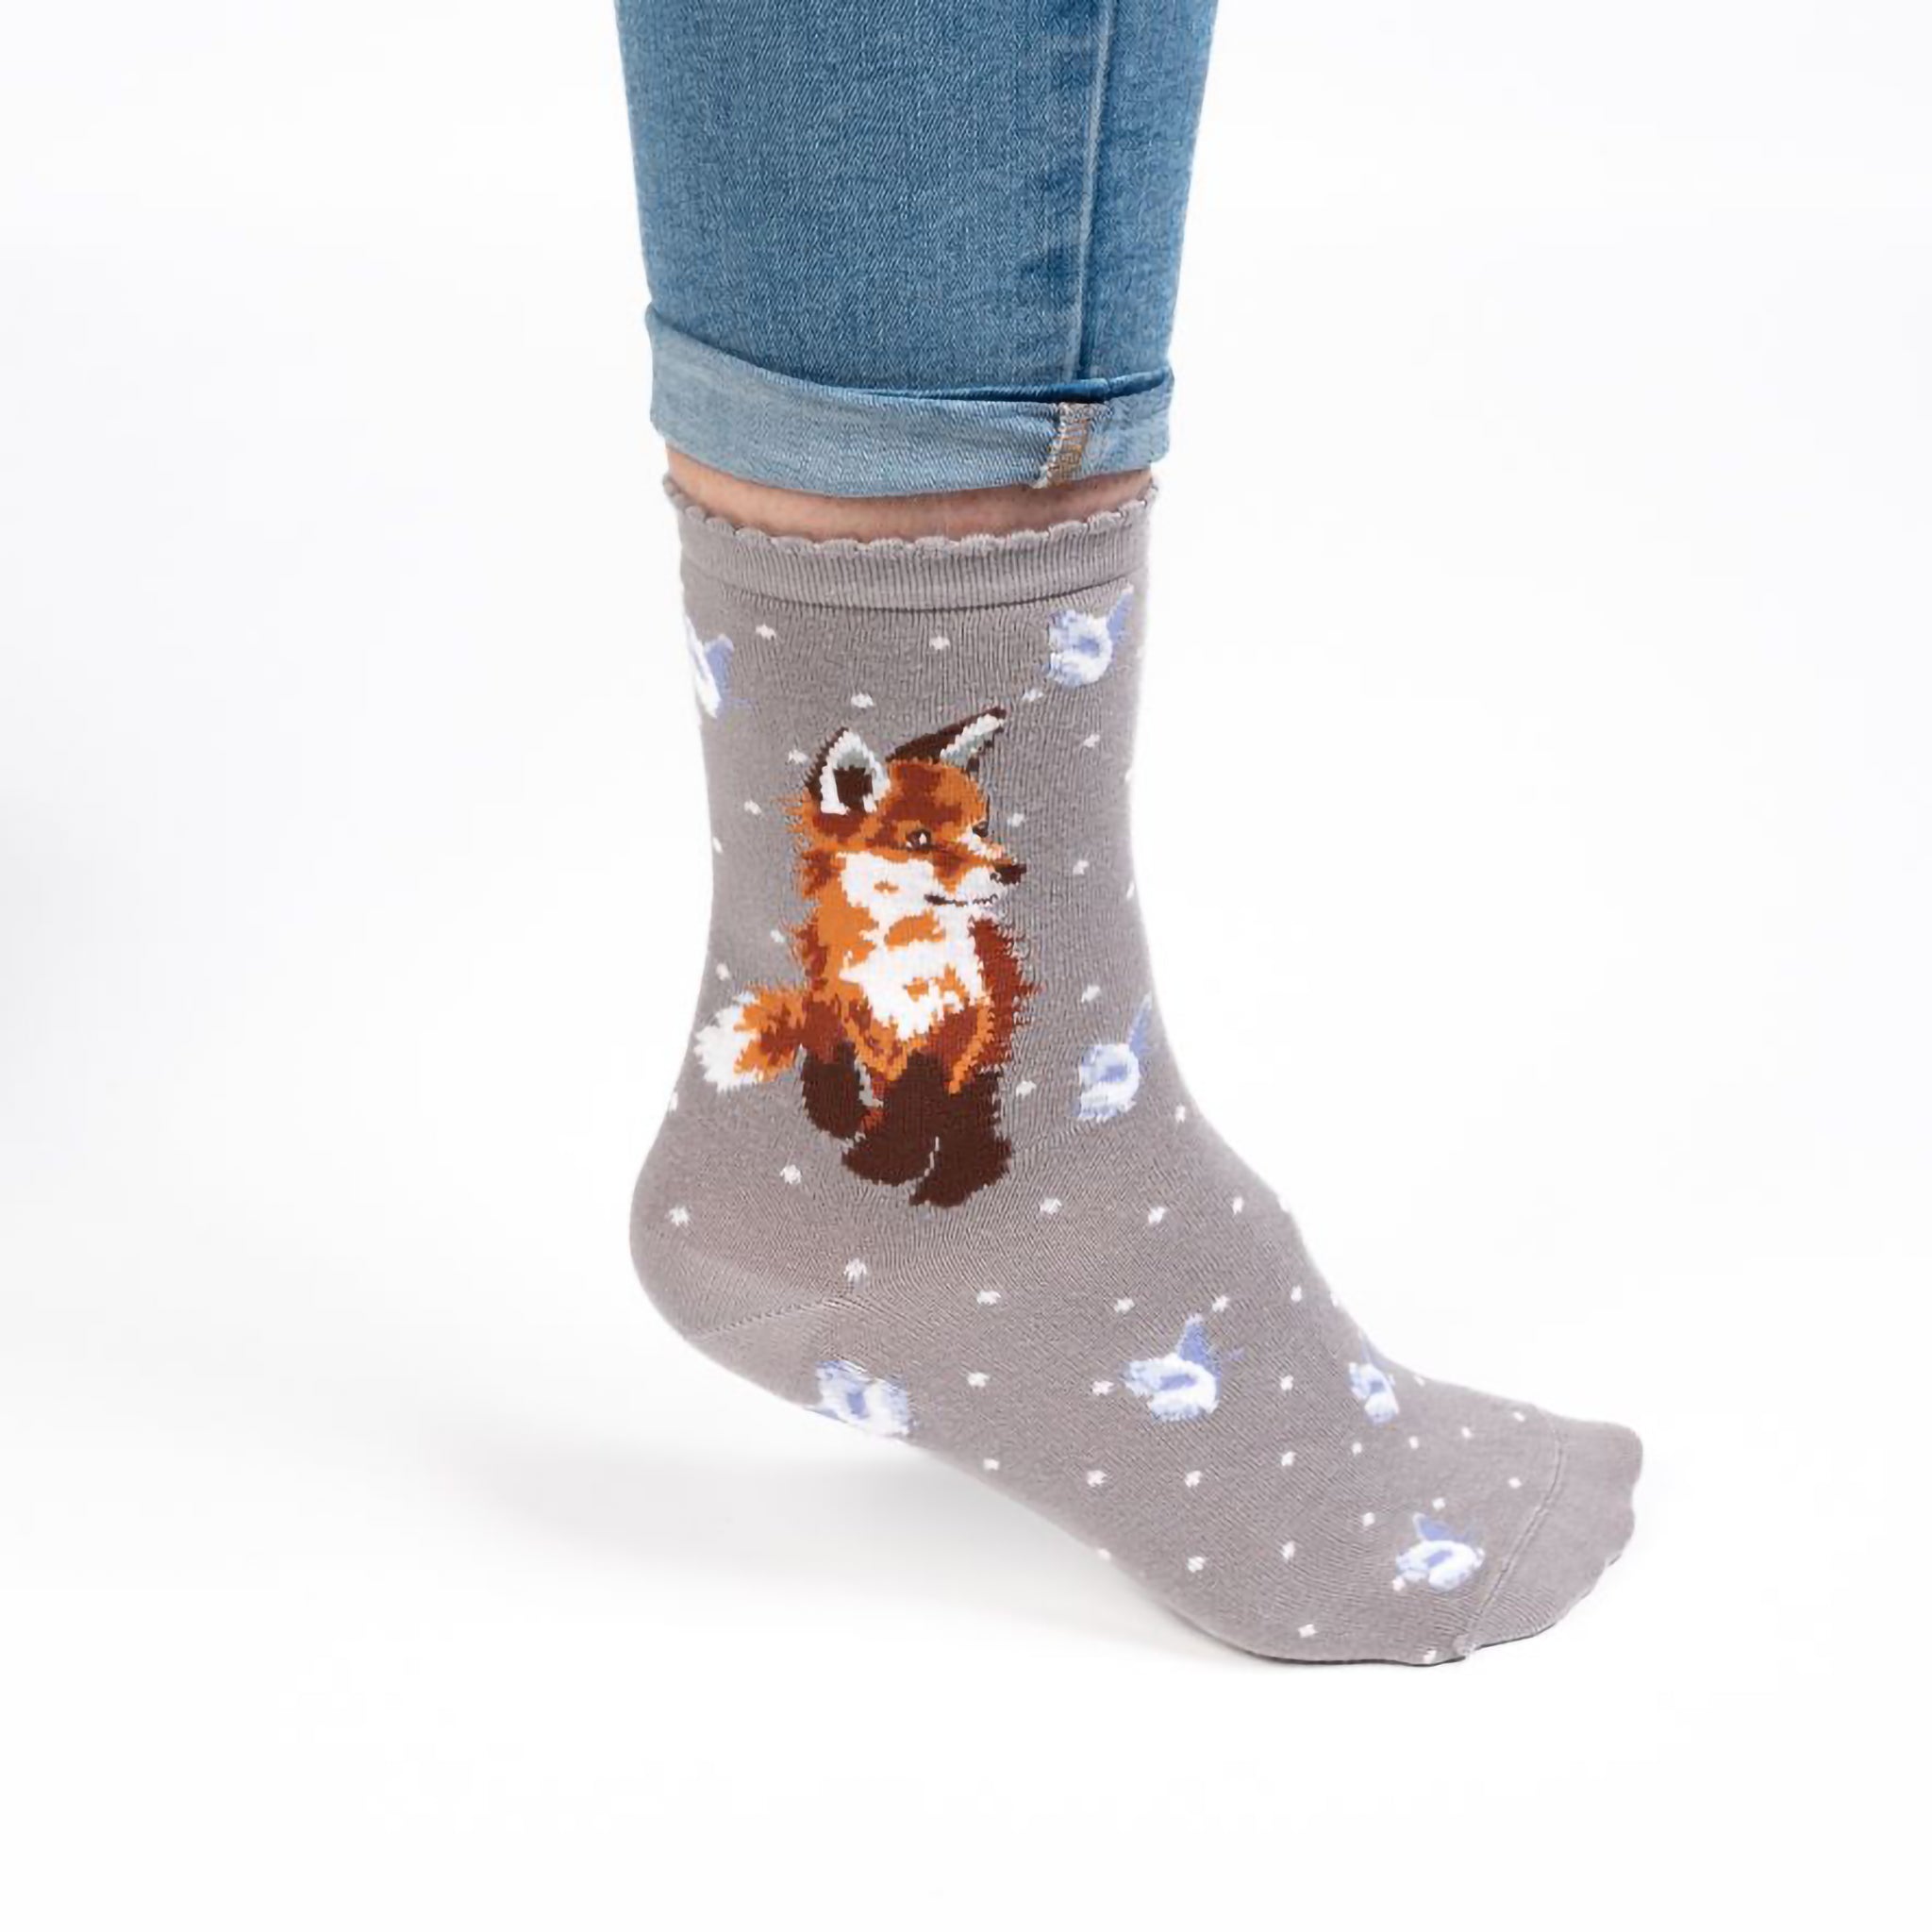 Model wearing a pair of warm grey socks with a little baby fox cub picture and white polka dots